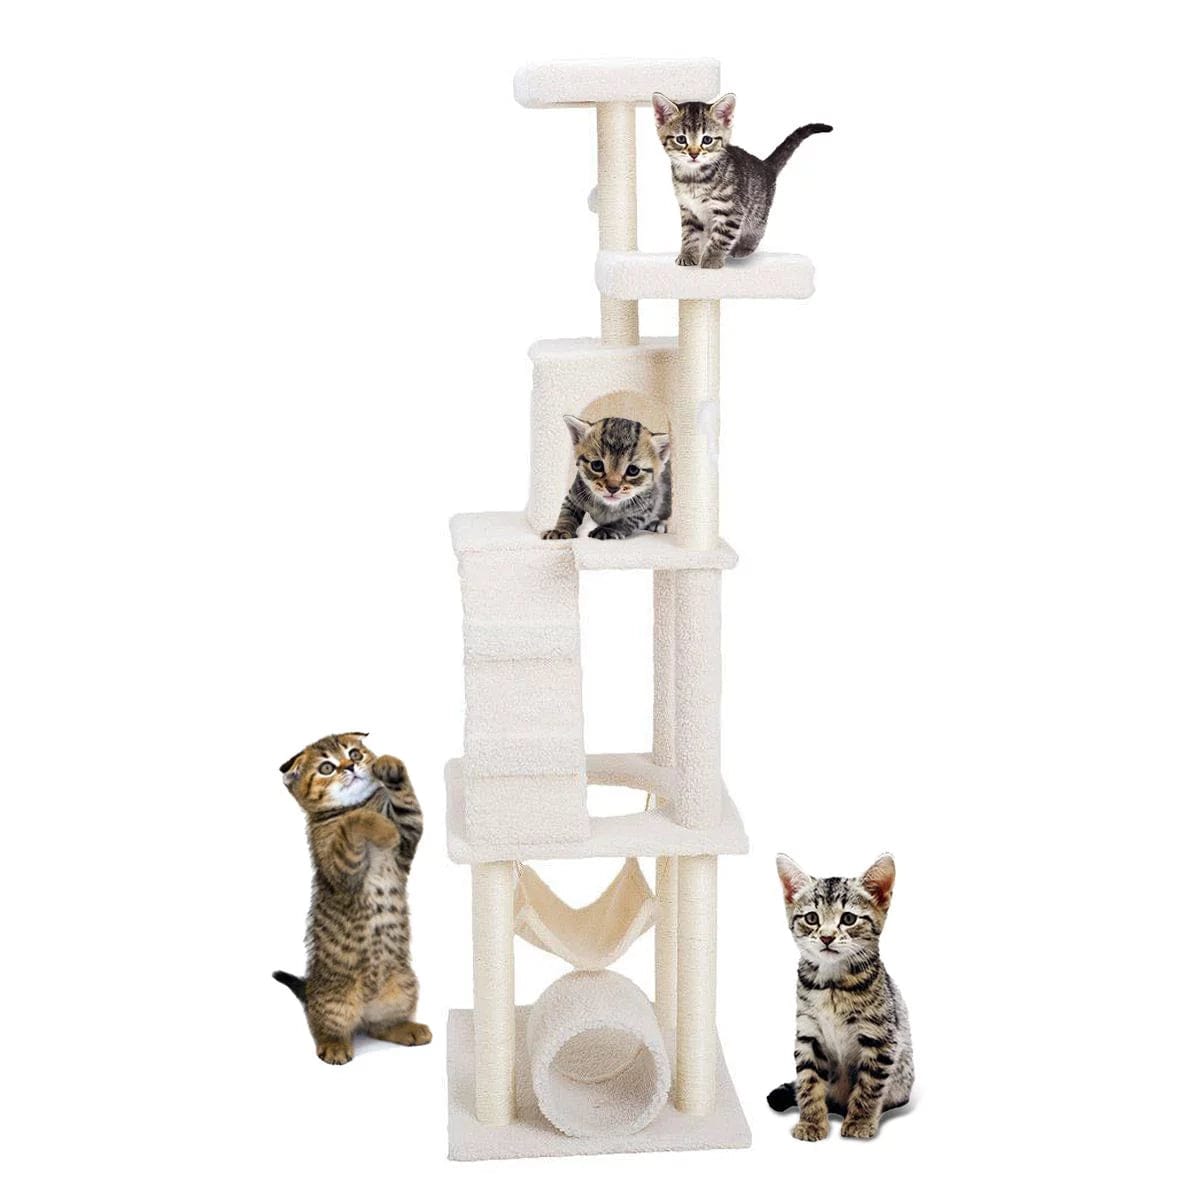 69" Cat Tree Furniture Tower Climbing Tree with Condo/House and Toys Beige/White